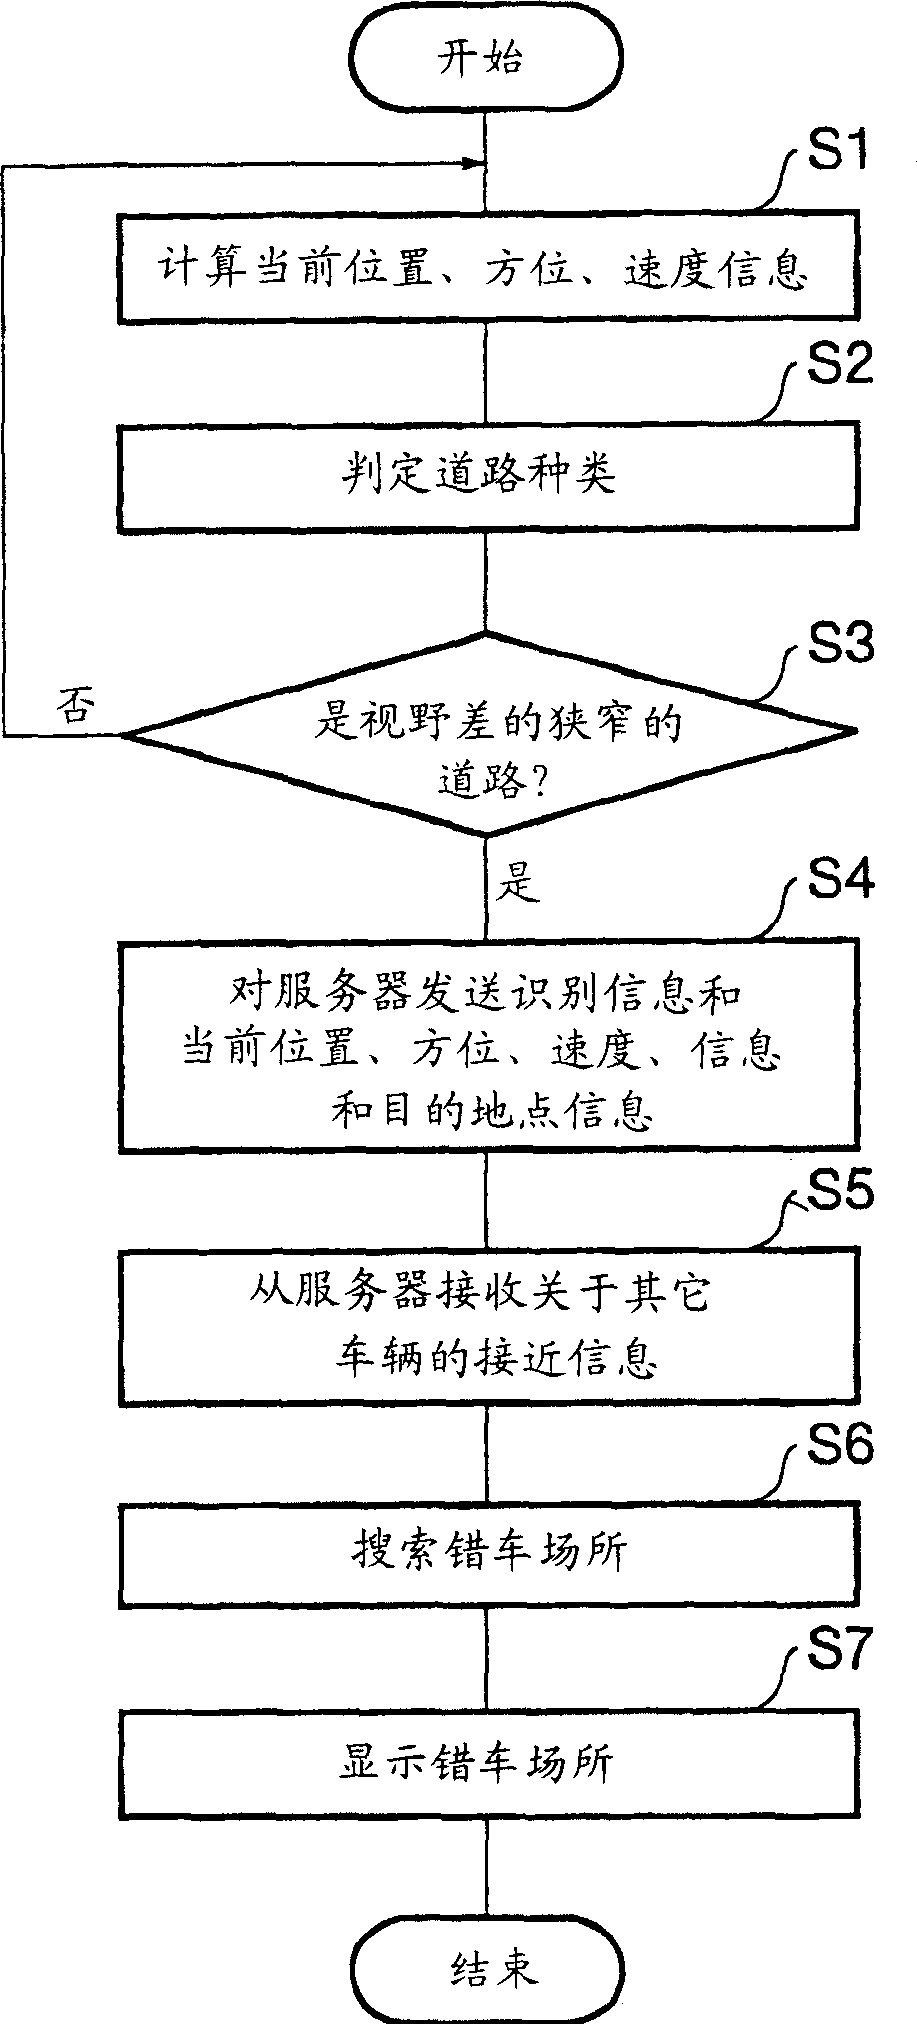 Navigation device and approach information display method